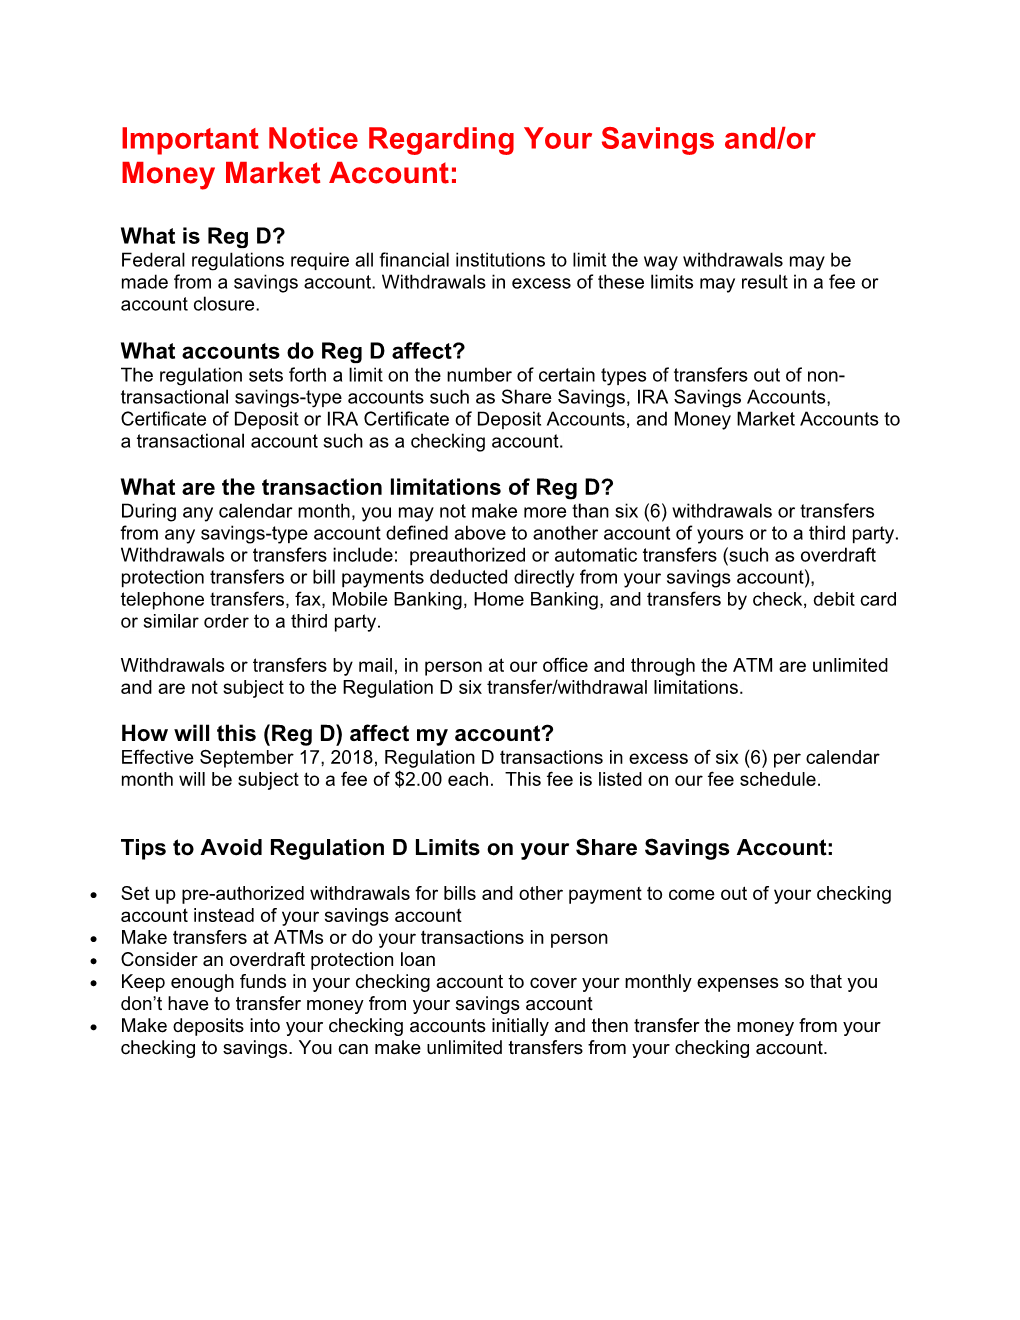 Important Notice Regarding Your Savings And/Or Money Market Account